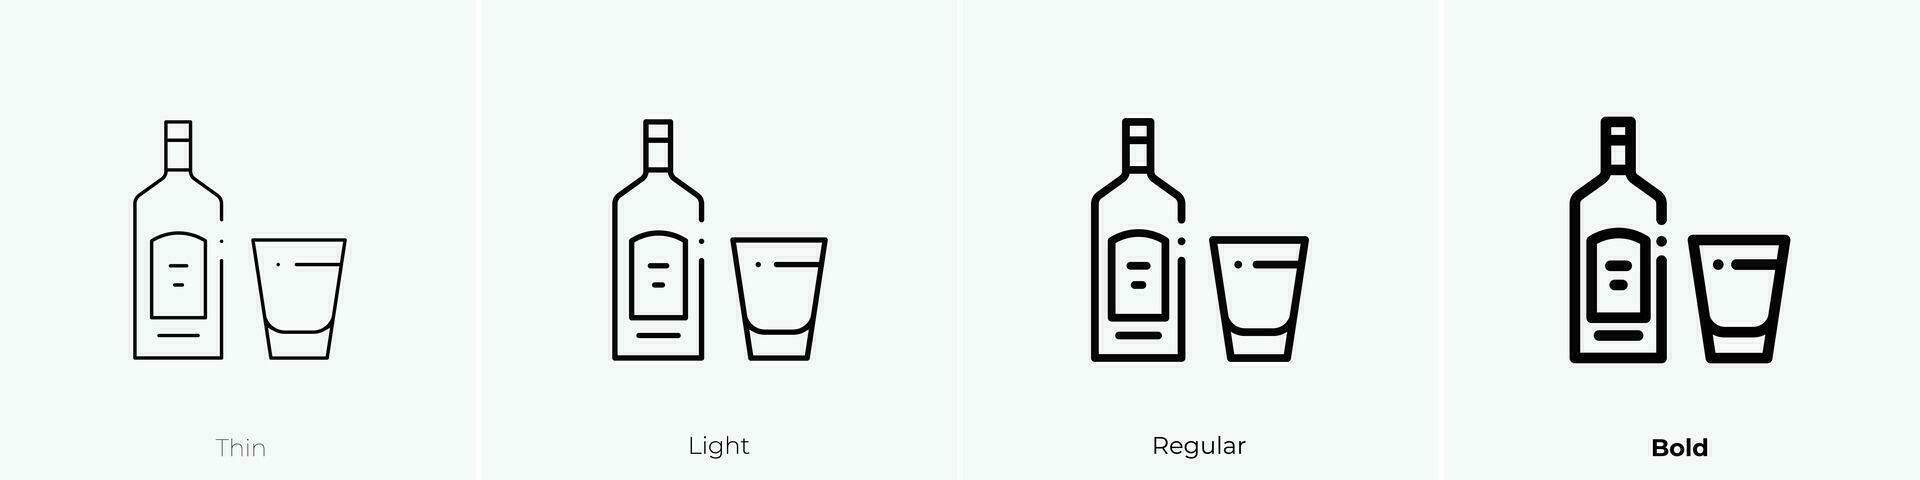 tequila icon. Thin, Light, Regular And Bold style design isolated on white background vector